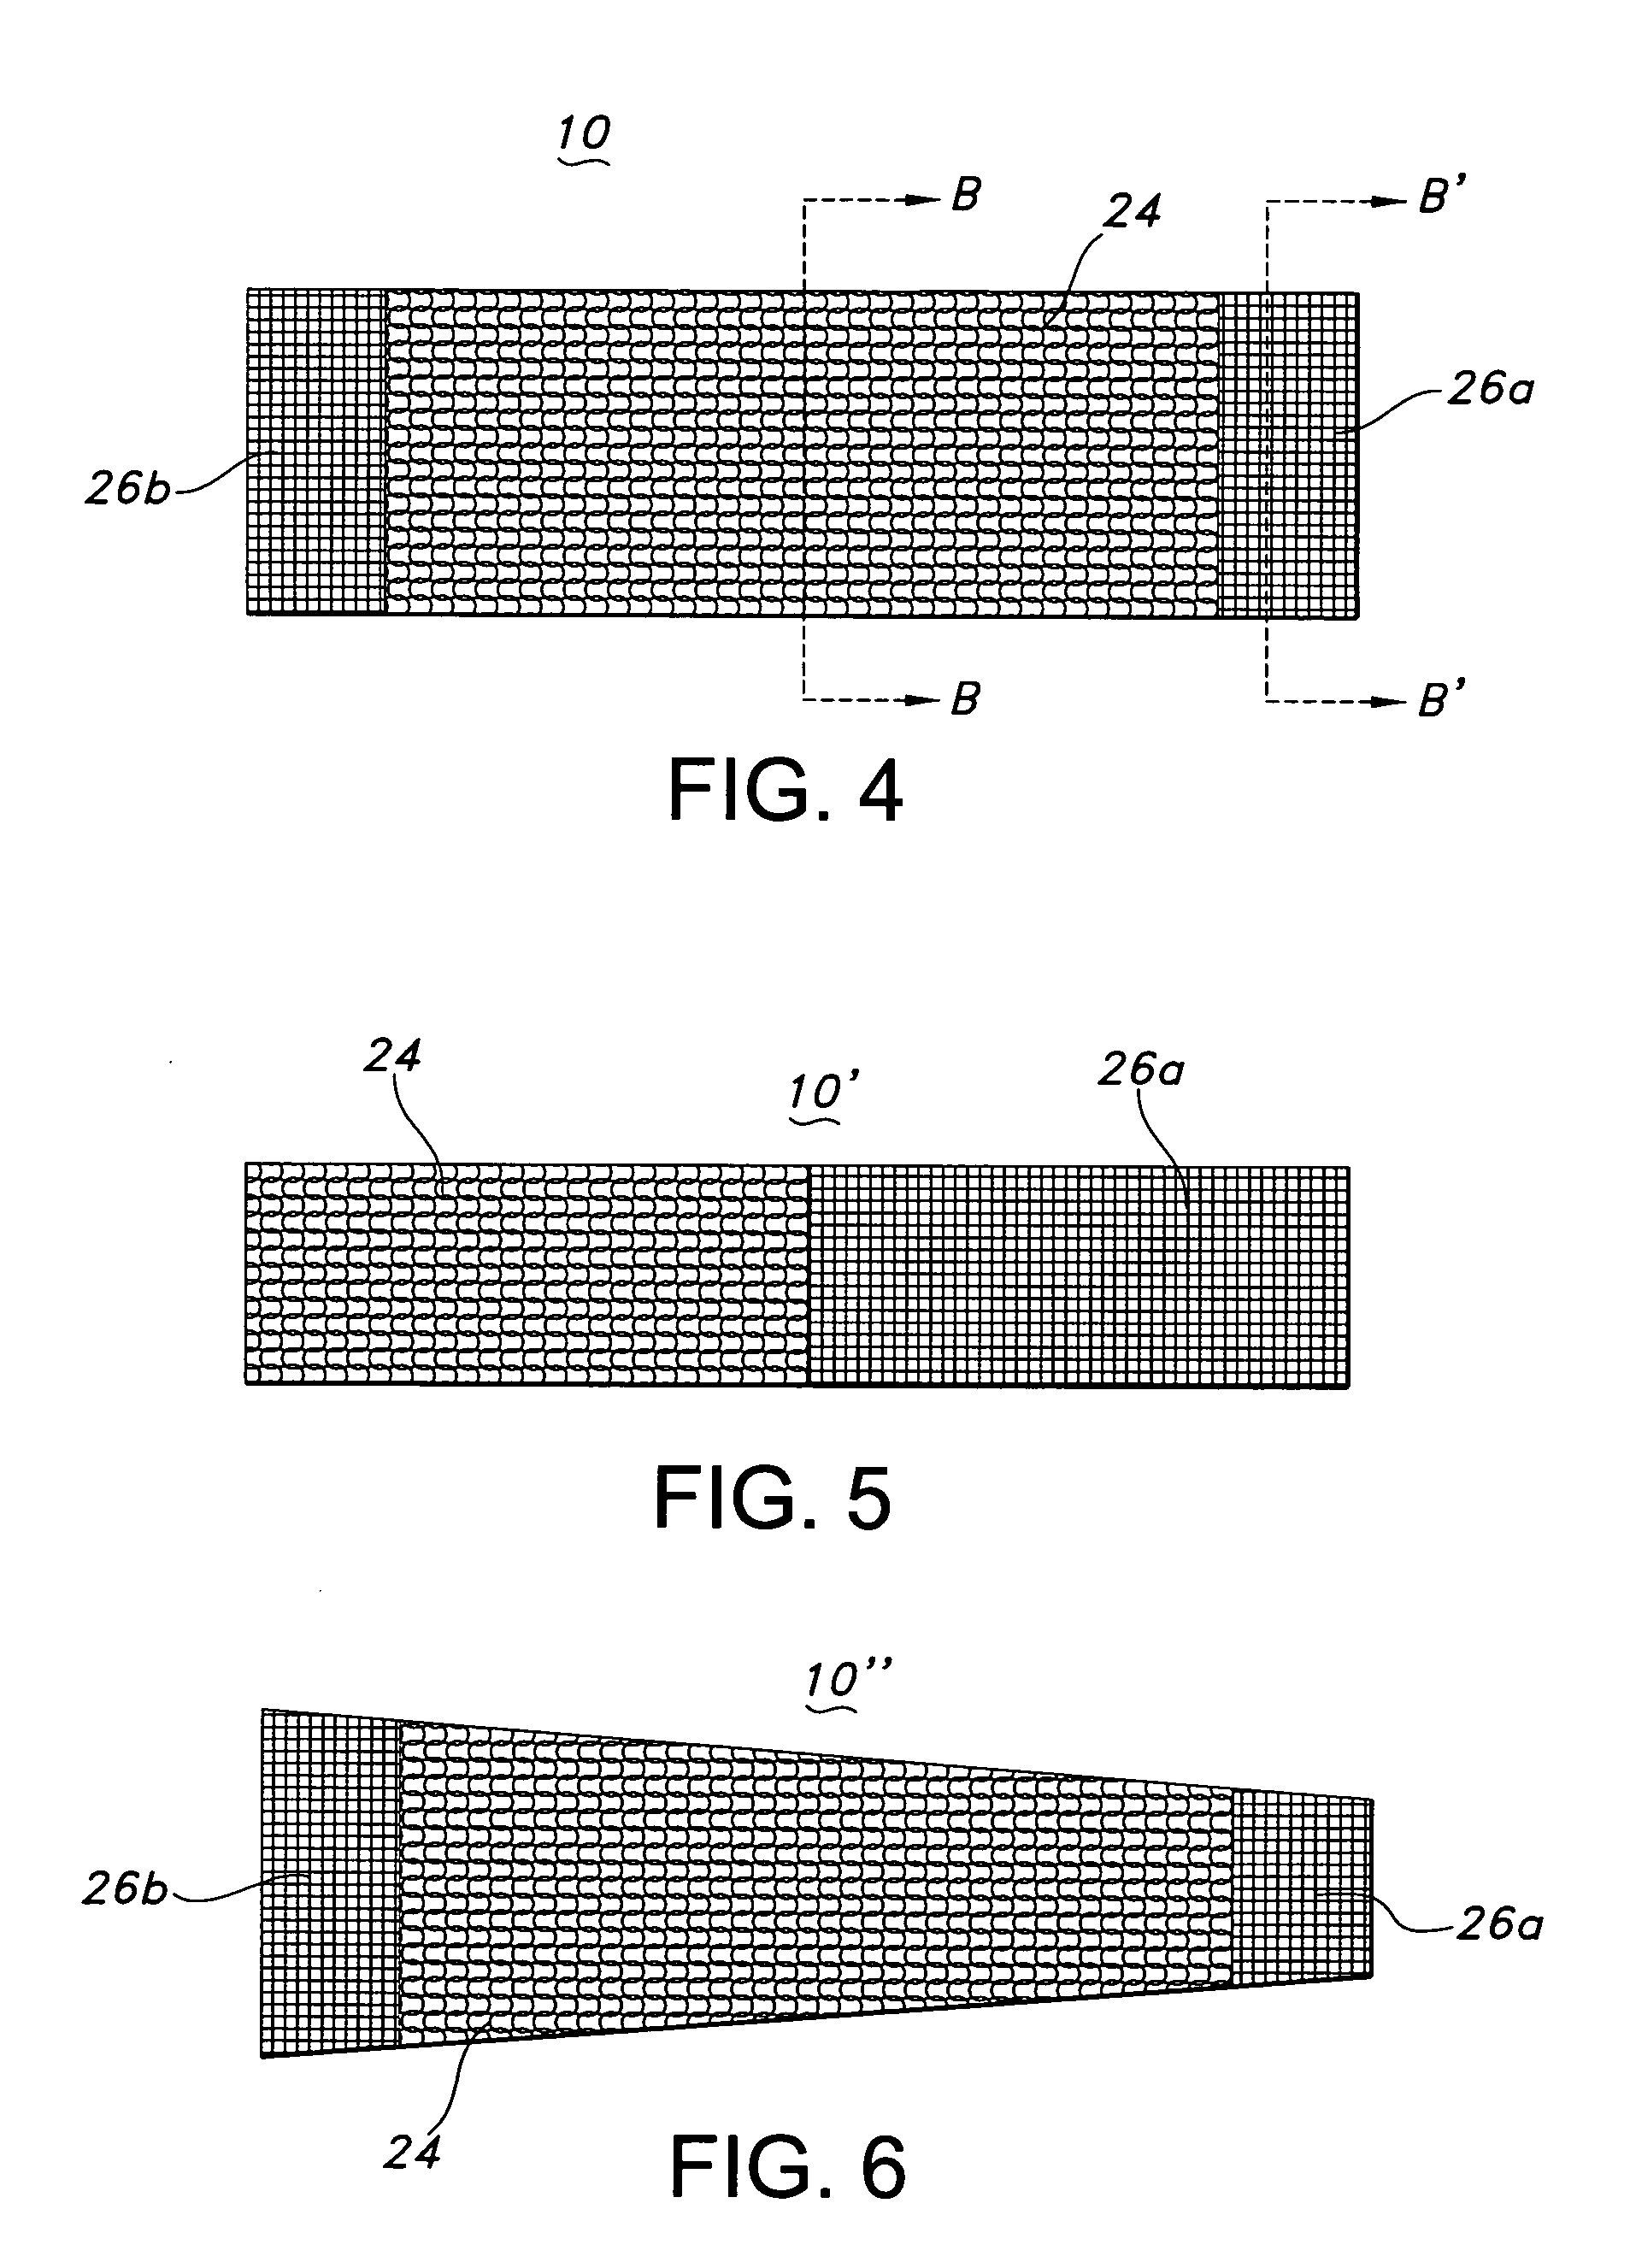 Composite medical textile material and implantable devices made therefrom